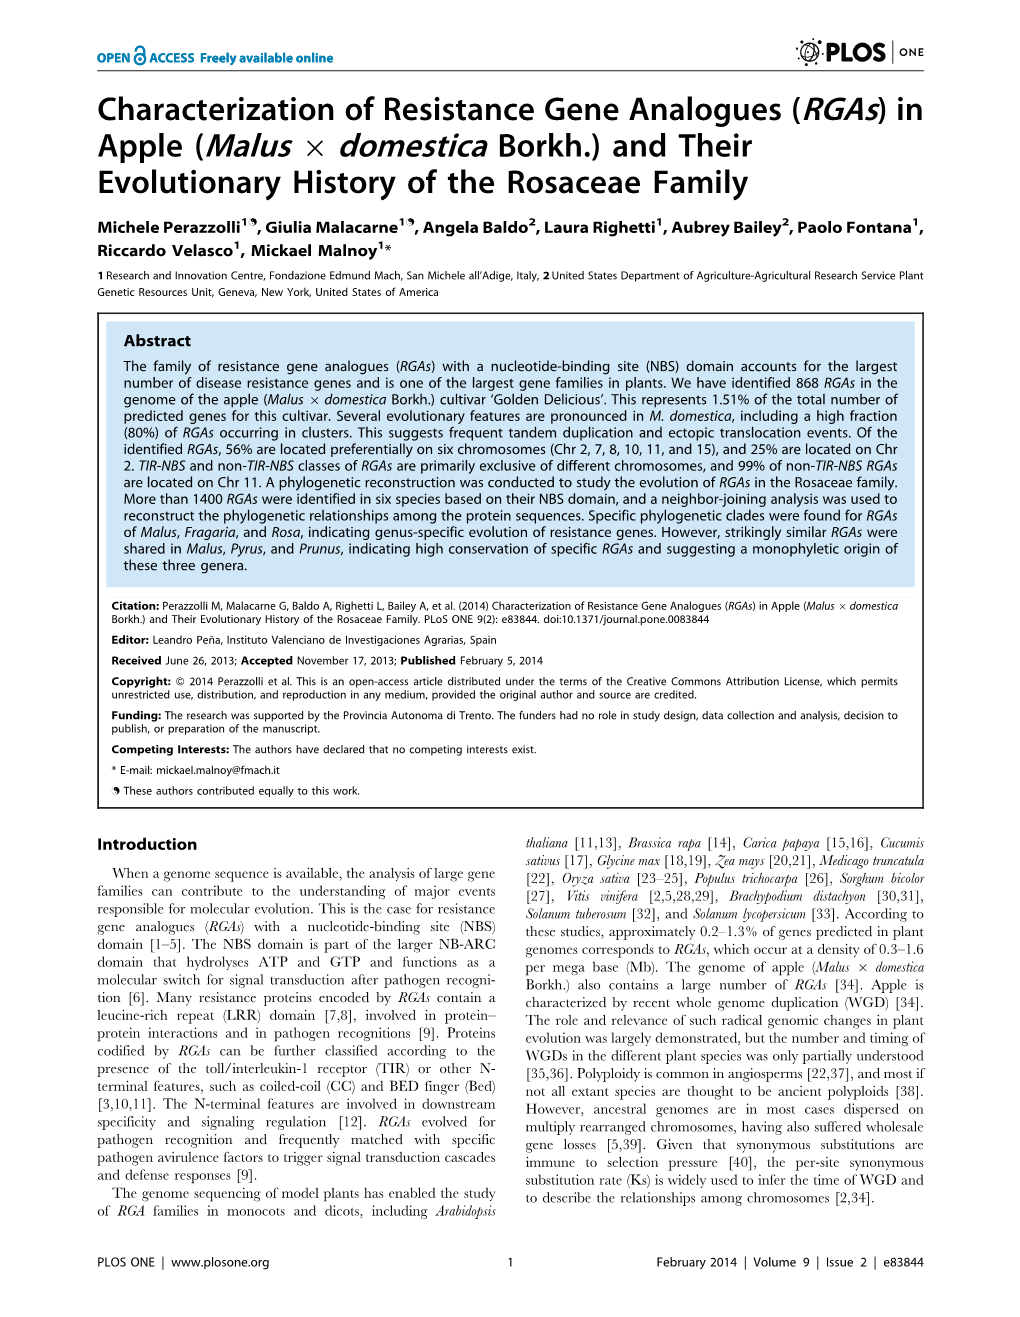 Characterization of Resistance Gene Analogues (Rgas) in Apple (Malus 6Domestica Borkh.) and Their Evolutionary History of the Rosaceae Family